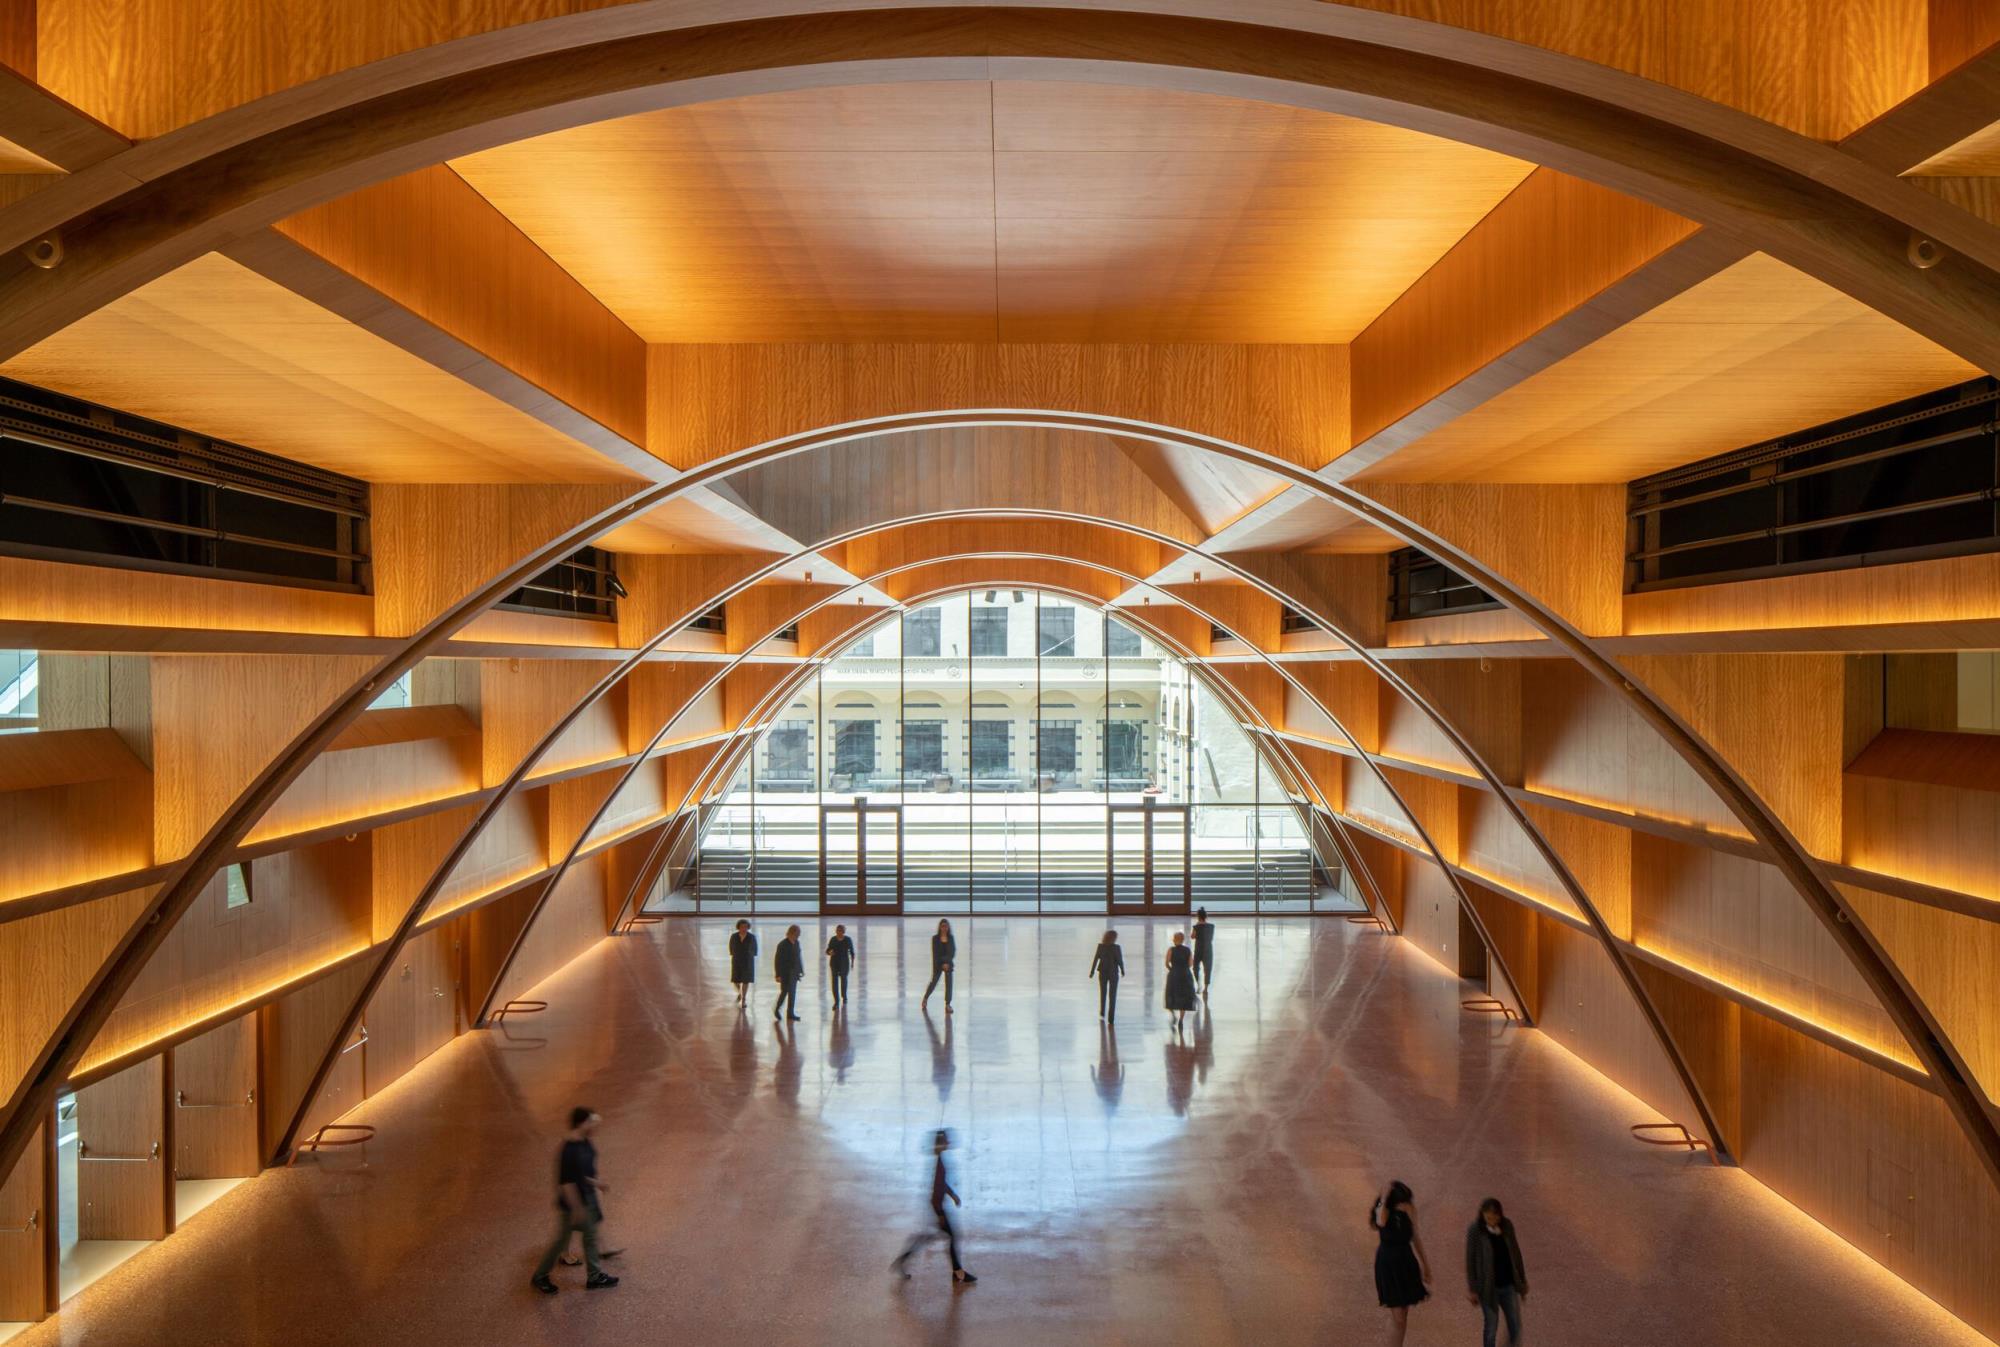 Curved, wooden interior lobby of the Audrey Irmas Pavilion